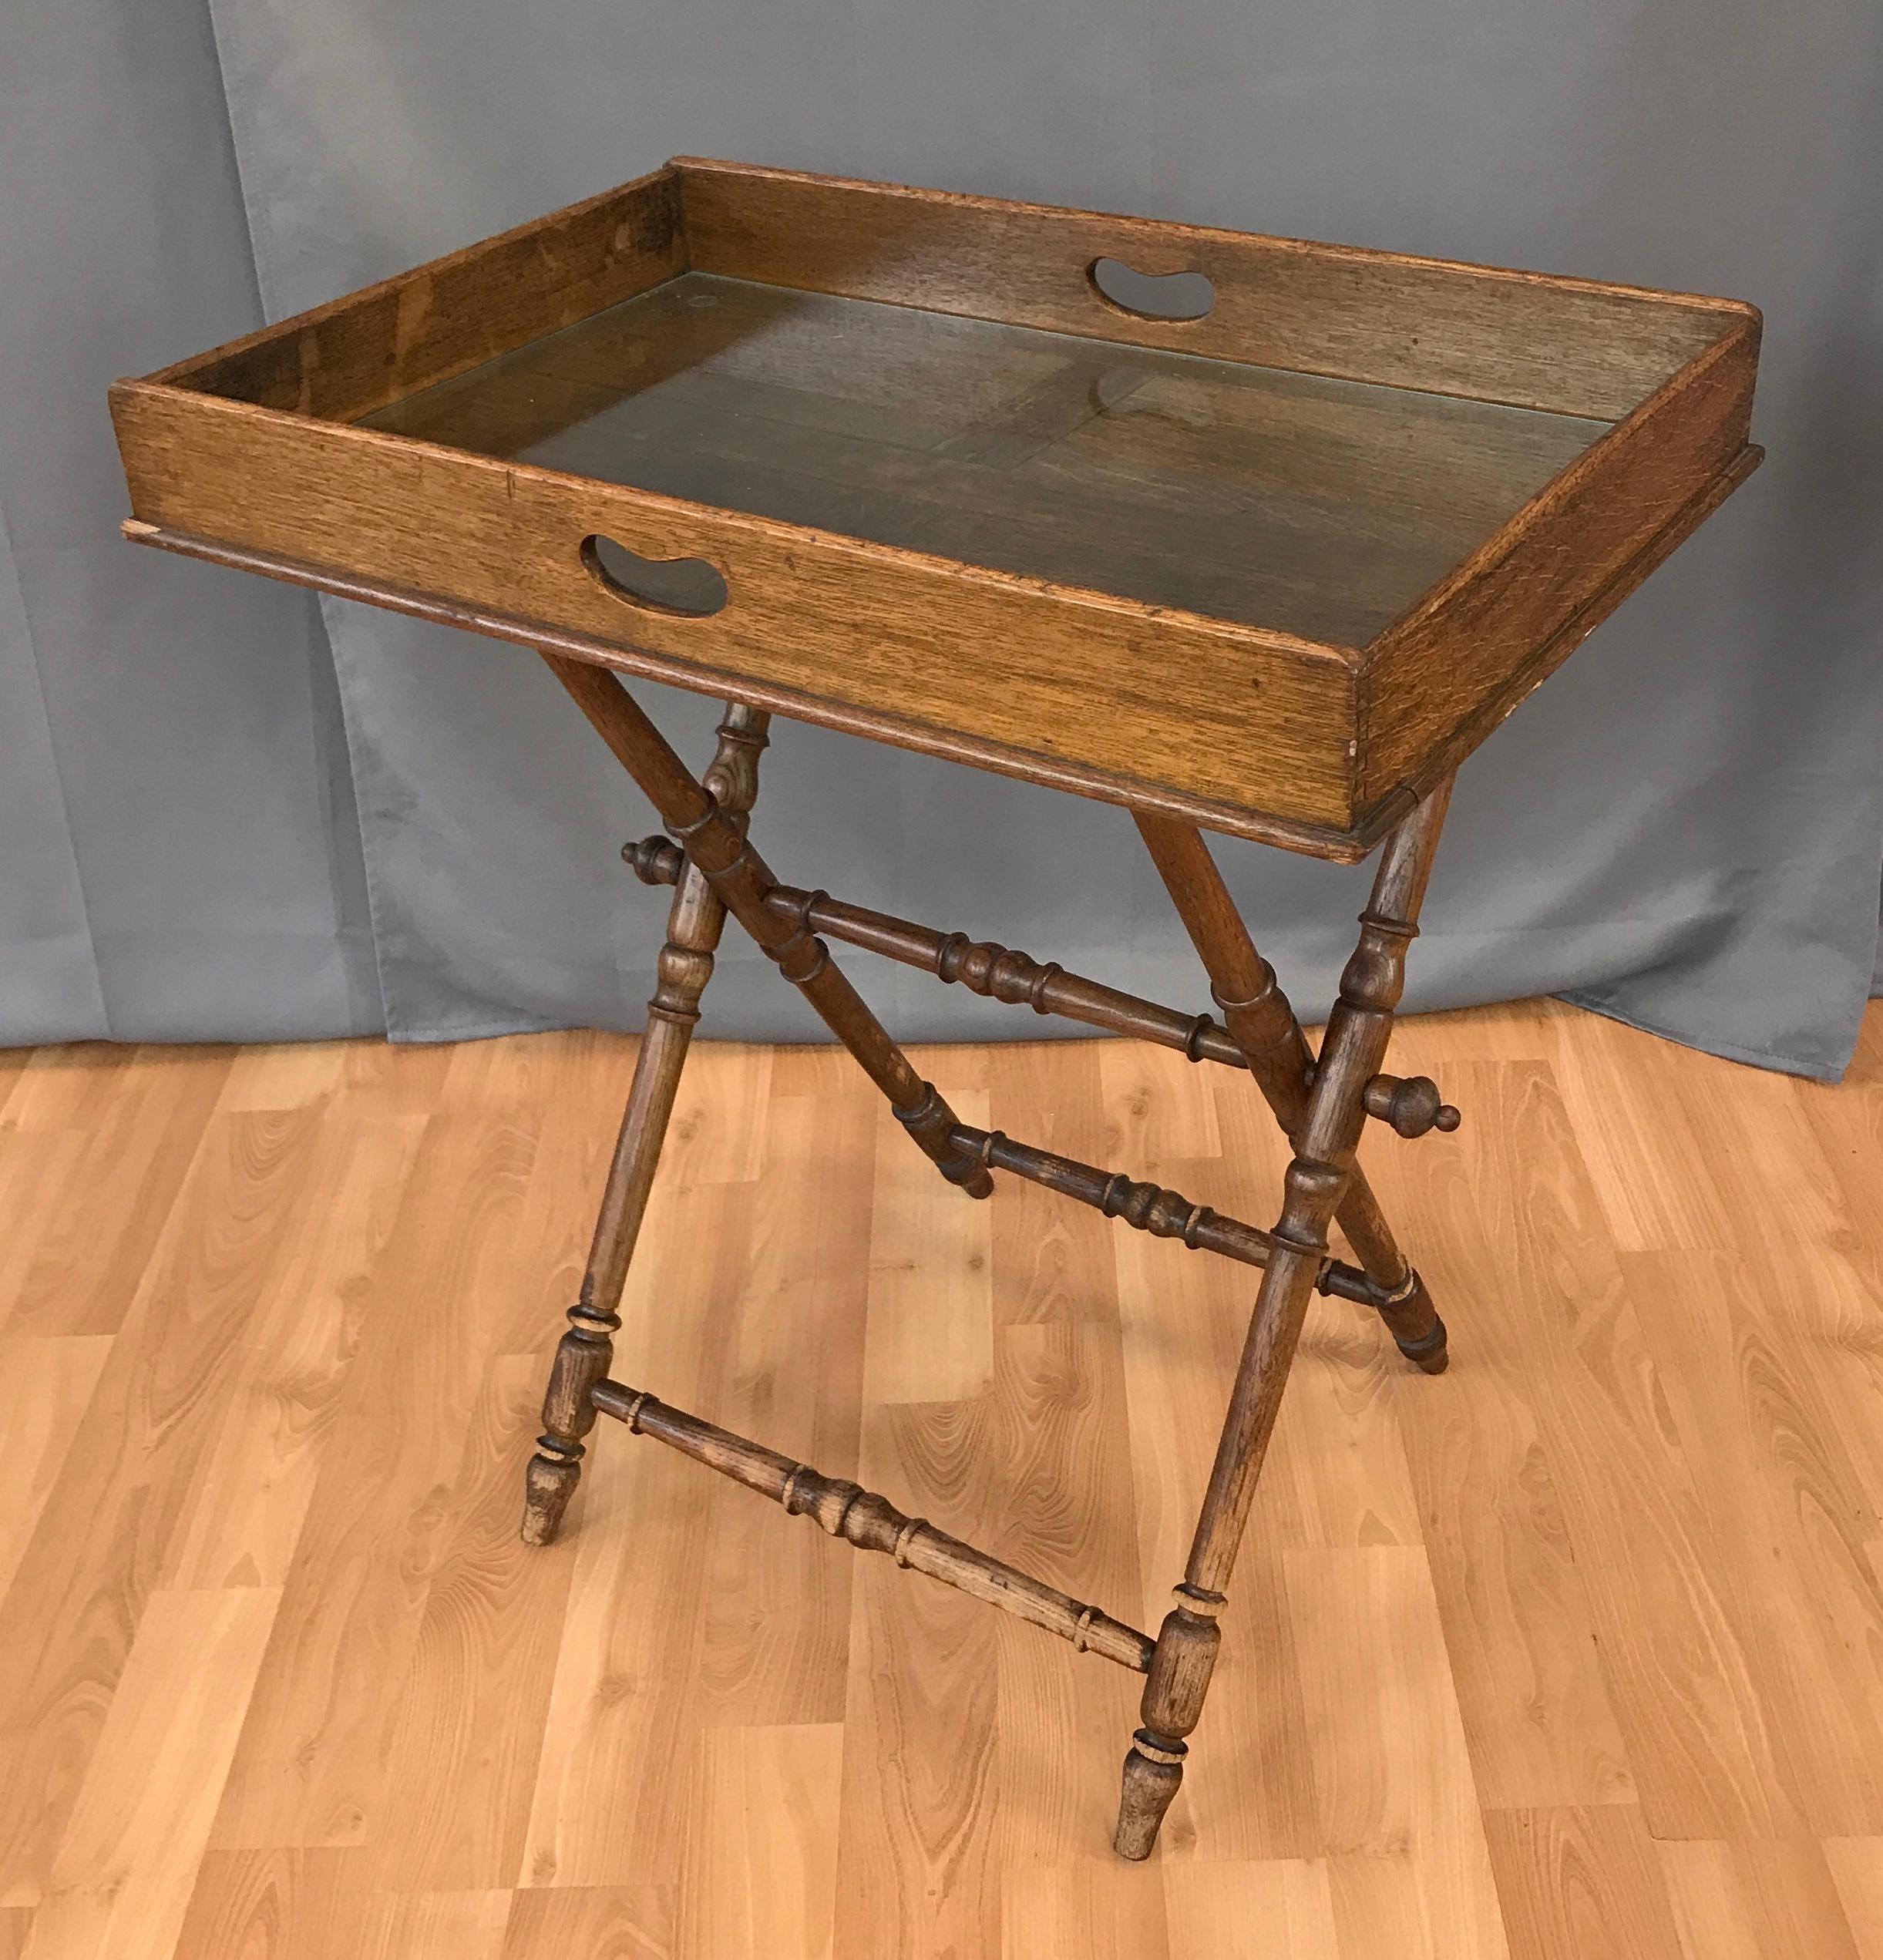 Antique English oak butlers tray on folding base from the Victorian period. 

The removable tray features keyhole side handles, exposed dovetail joinery and a glass insert to protect the tray surface.
The Campaign style folding base has